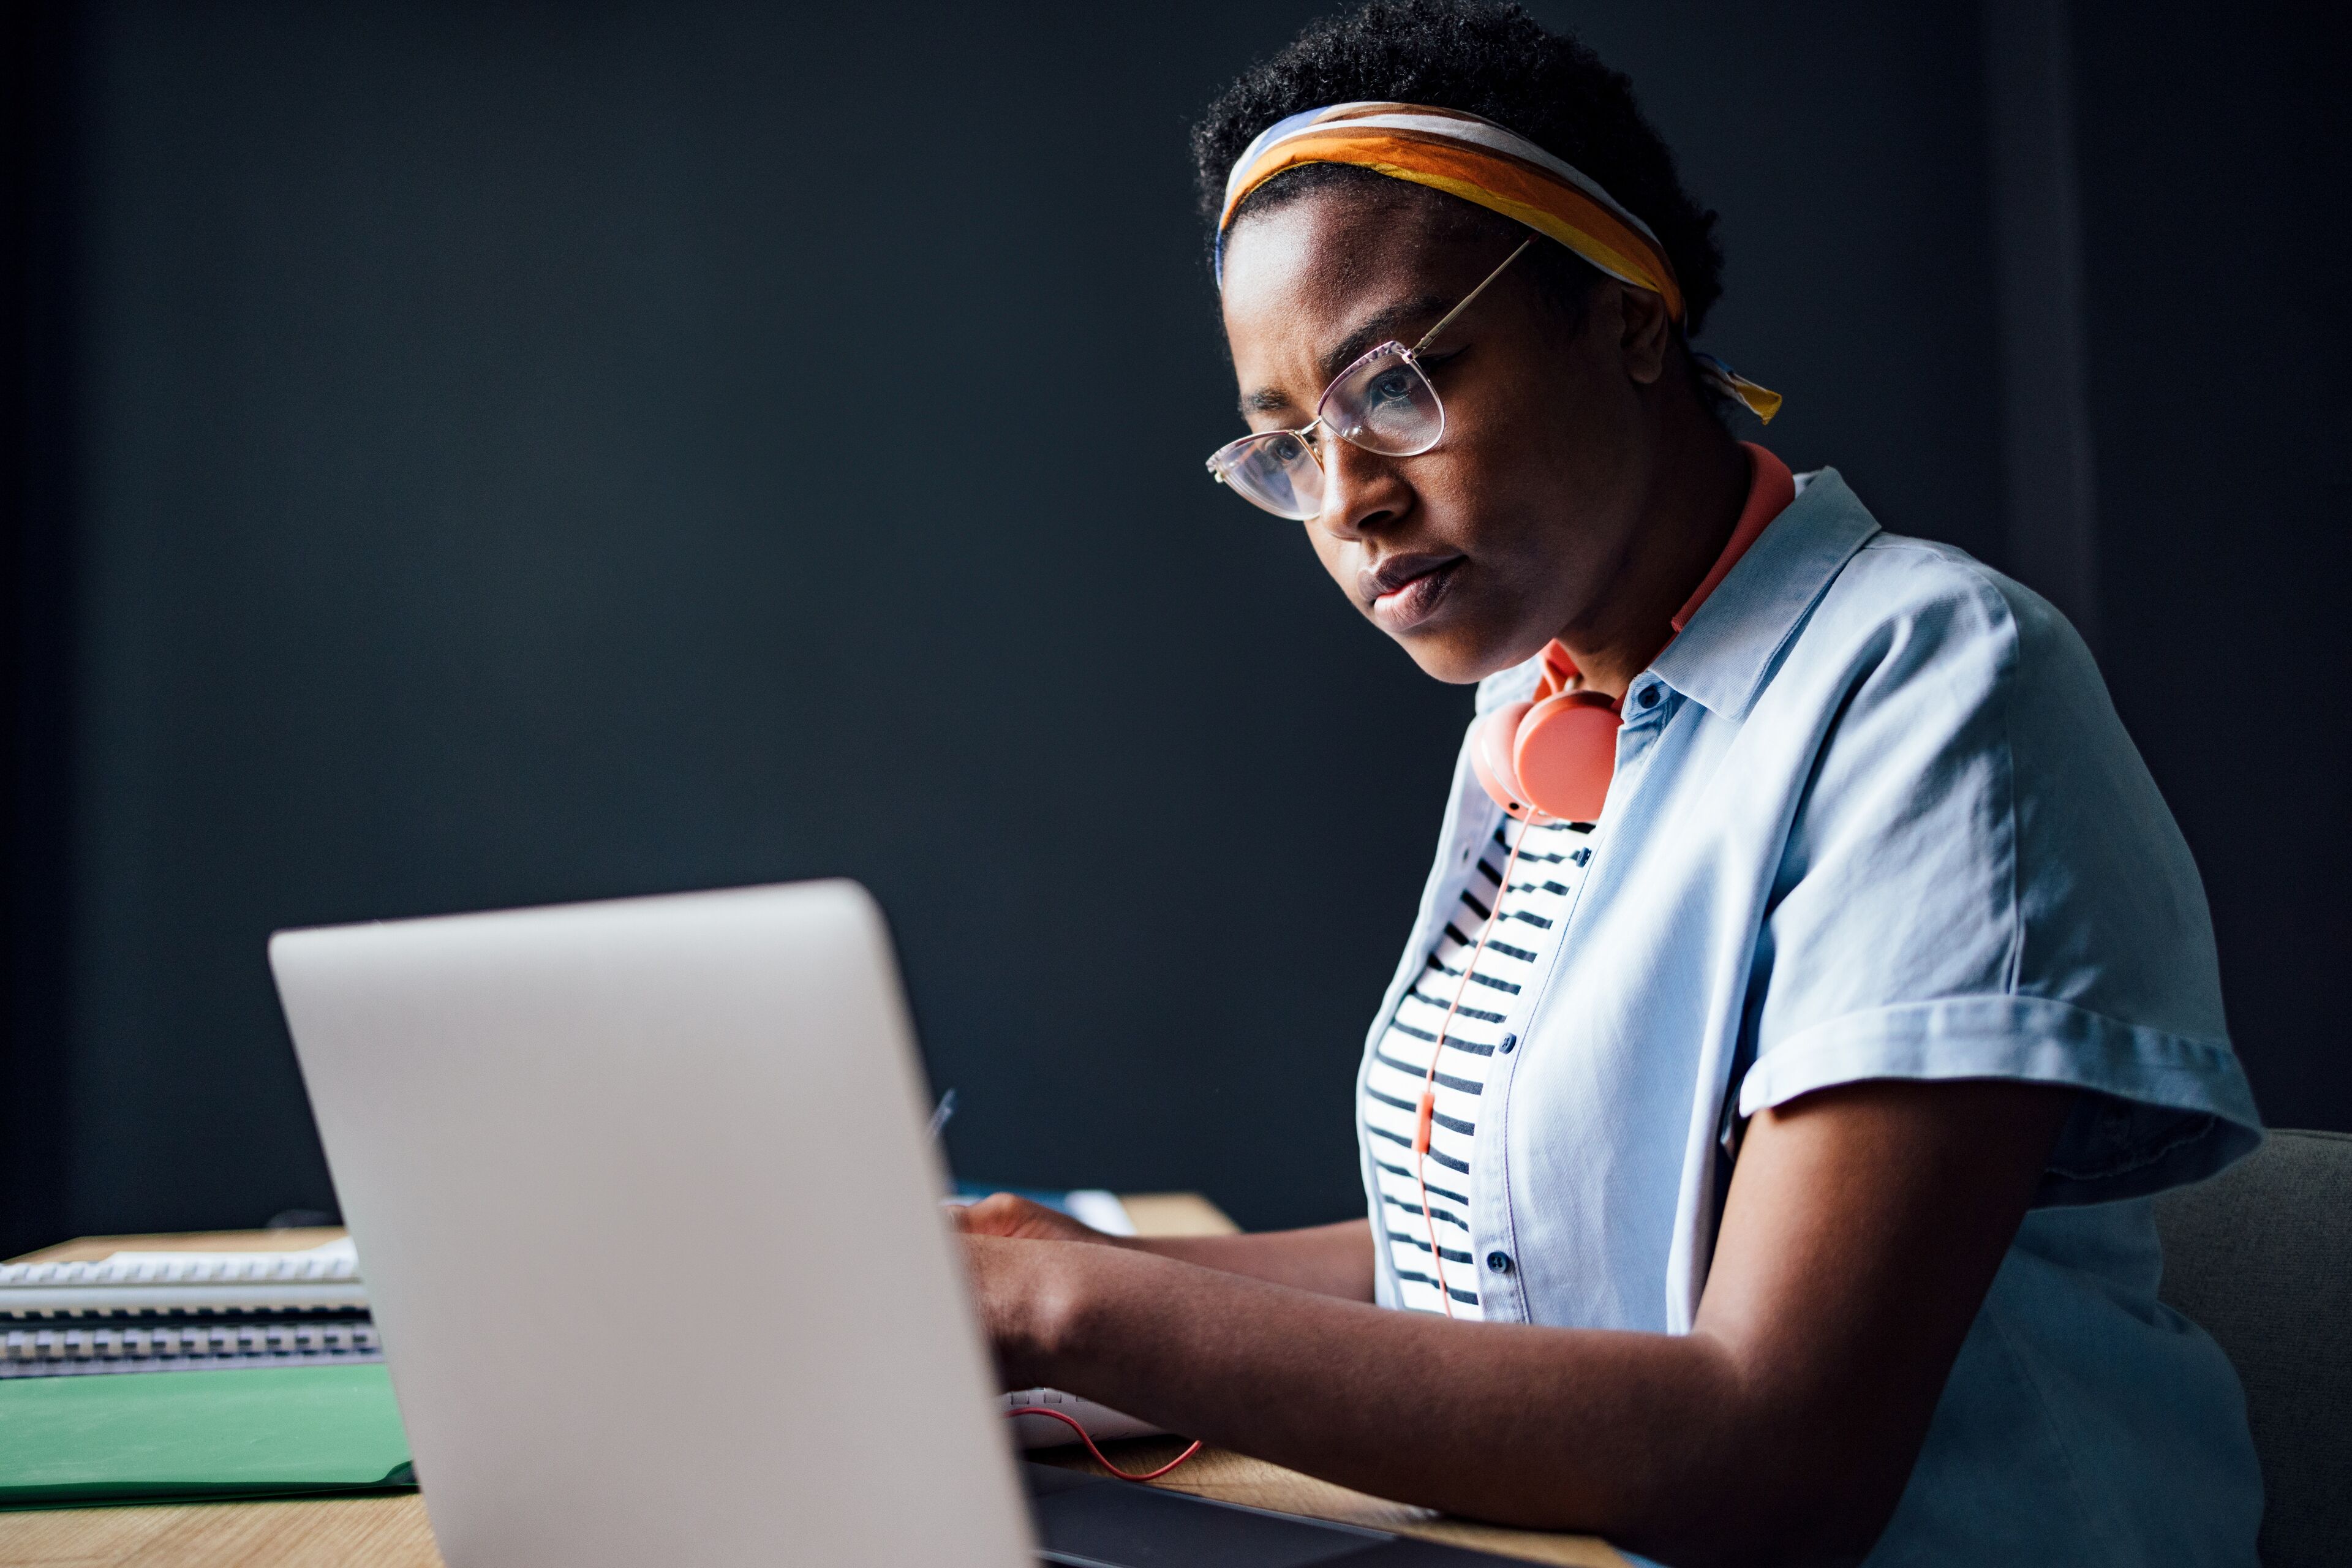 Serious African-American woman studying using a laptop computer while sitting at desk and writing homework in a notebook.